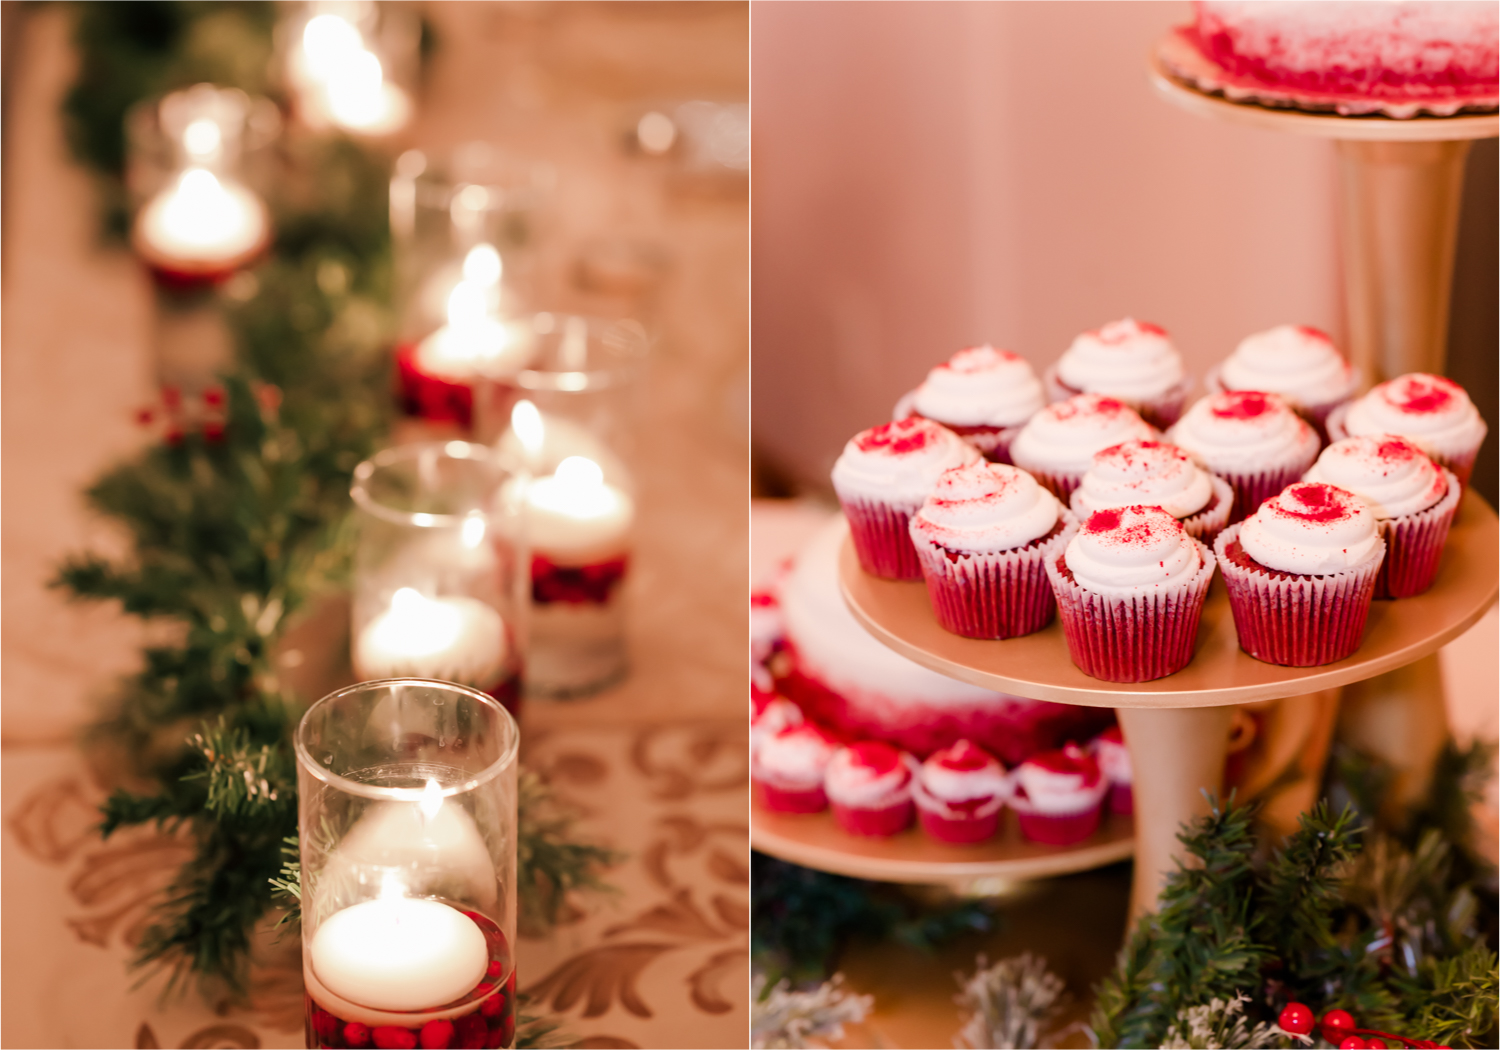 Winter Wonderland Wedding in Colorado Springs | Britni Girard Photography Colorado Wedding Photography and Film Team | Snow covered mountains and Christmas just a few days away | Annika + John's Nostalgic Winter Wedding | Bride's Dress iDream Bridal Essence of Australia | Air Force Academy | Reception with hand-painted mountain backdrops, candelight and Christmas trees.  Burgundy, Navy and Gold | Cakes by King Soopers with 7 types of Christmas Cookies